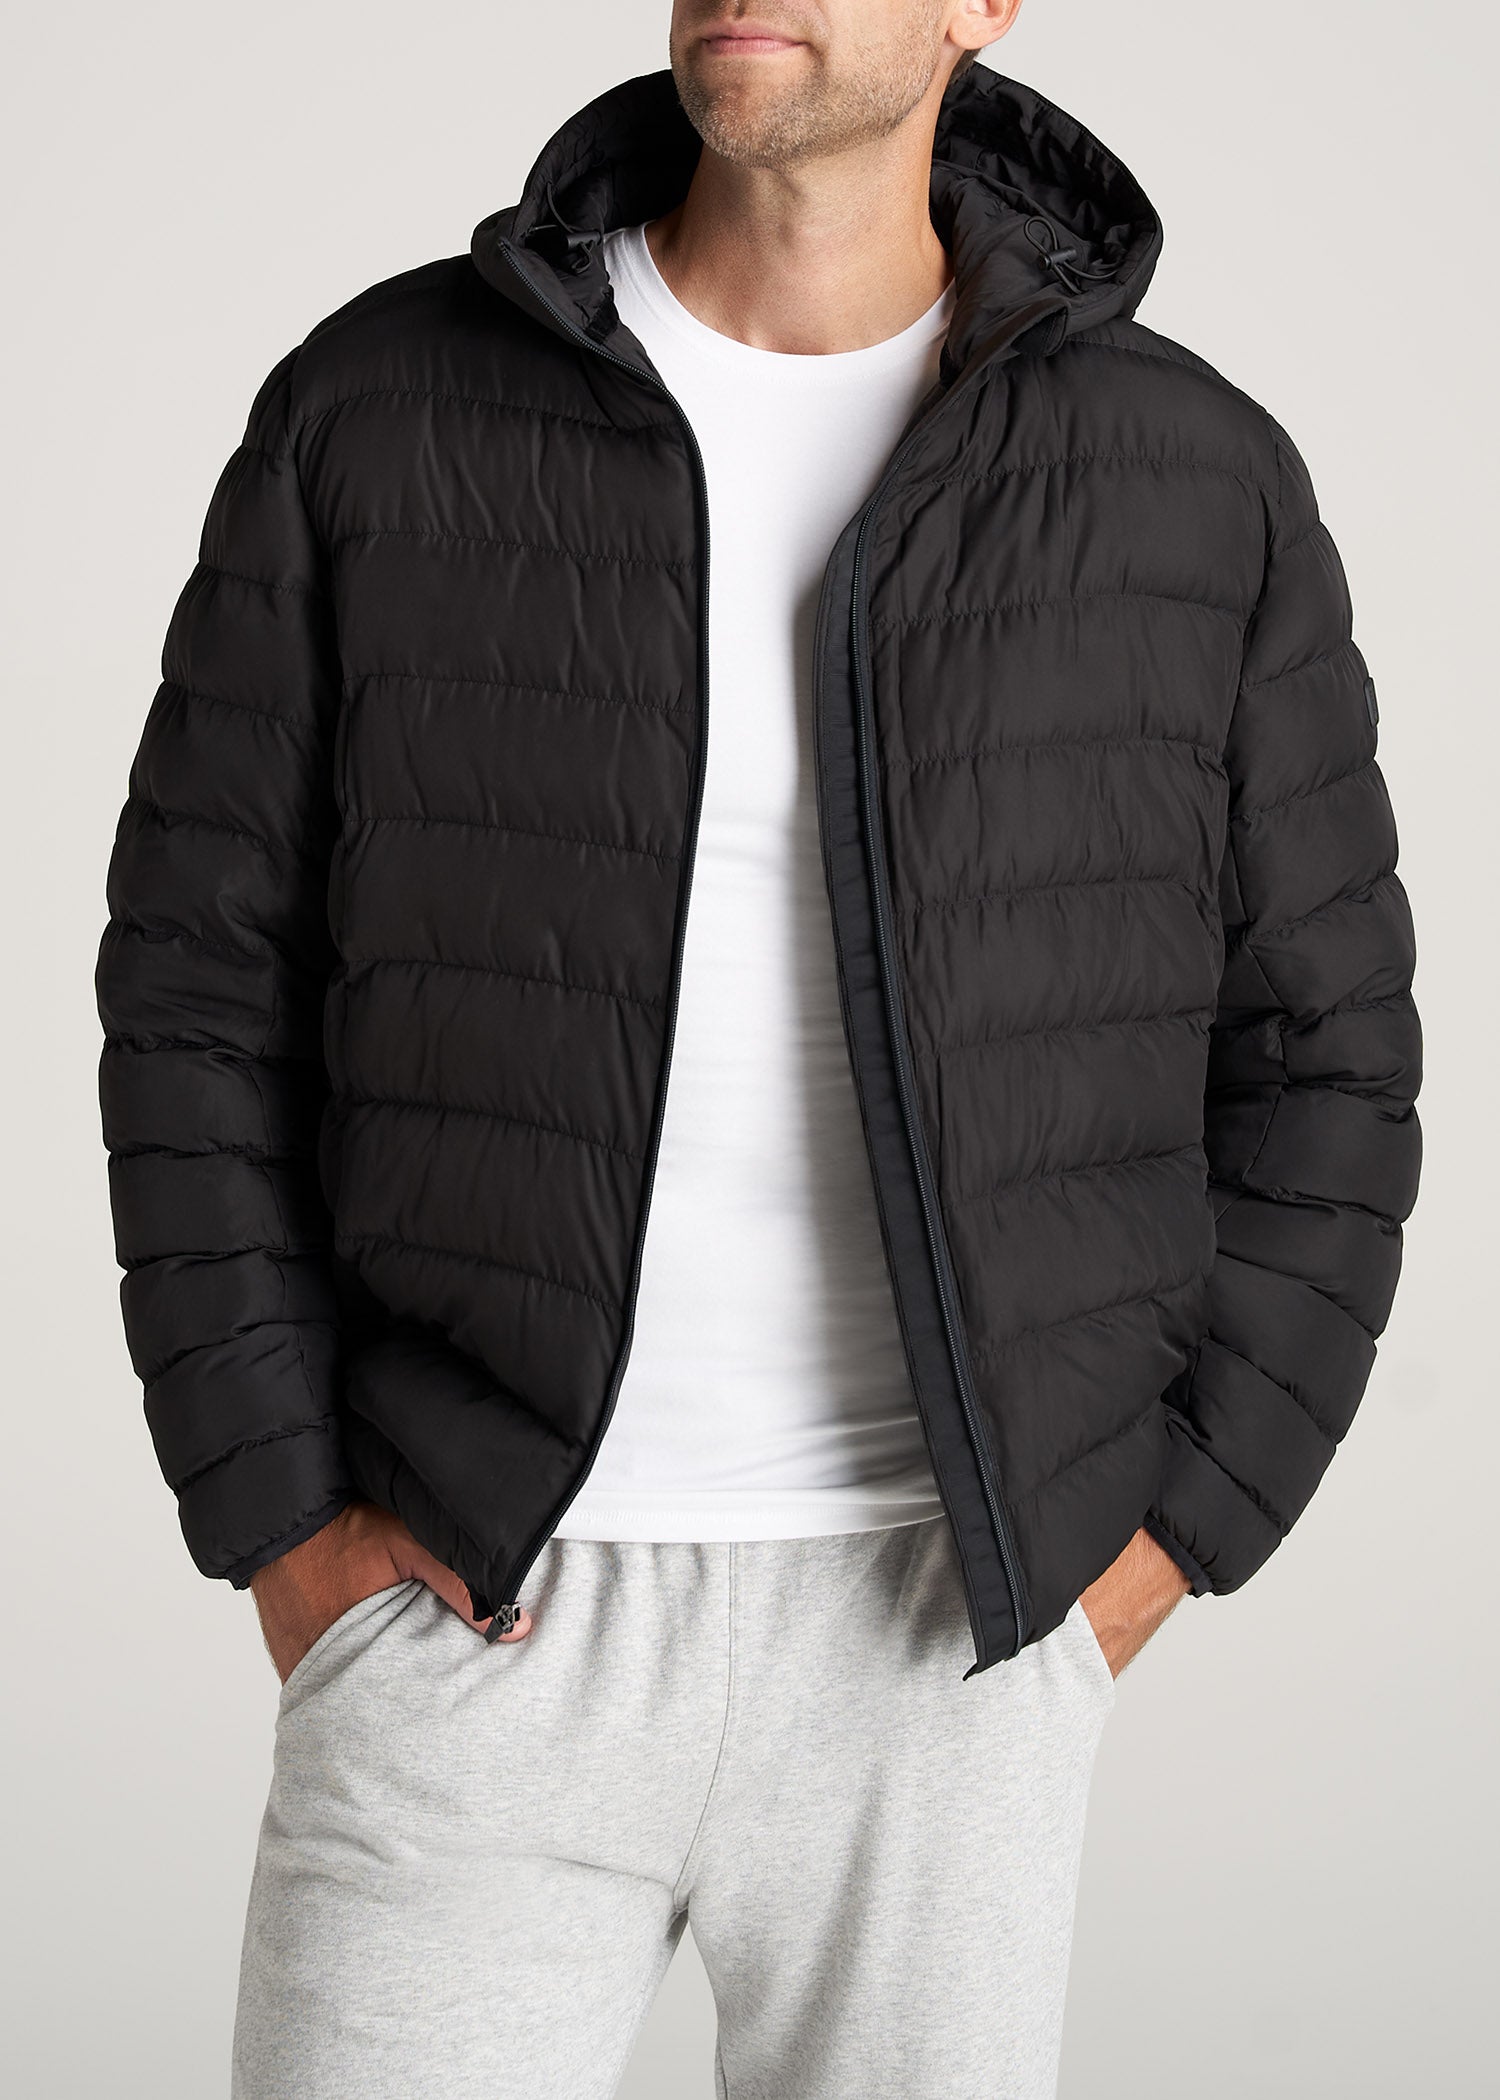 Burberry Puffer Jacket Mens Factory Price, Save 58% 